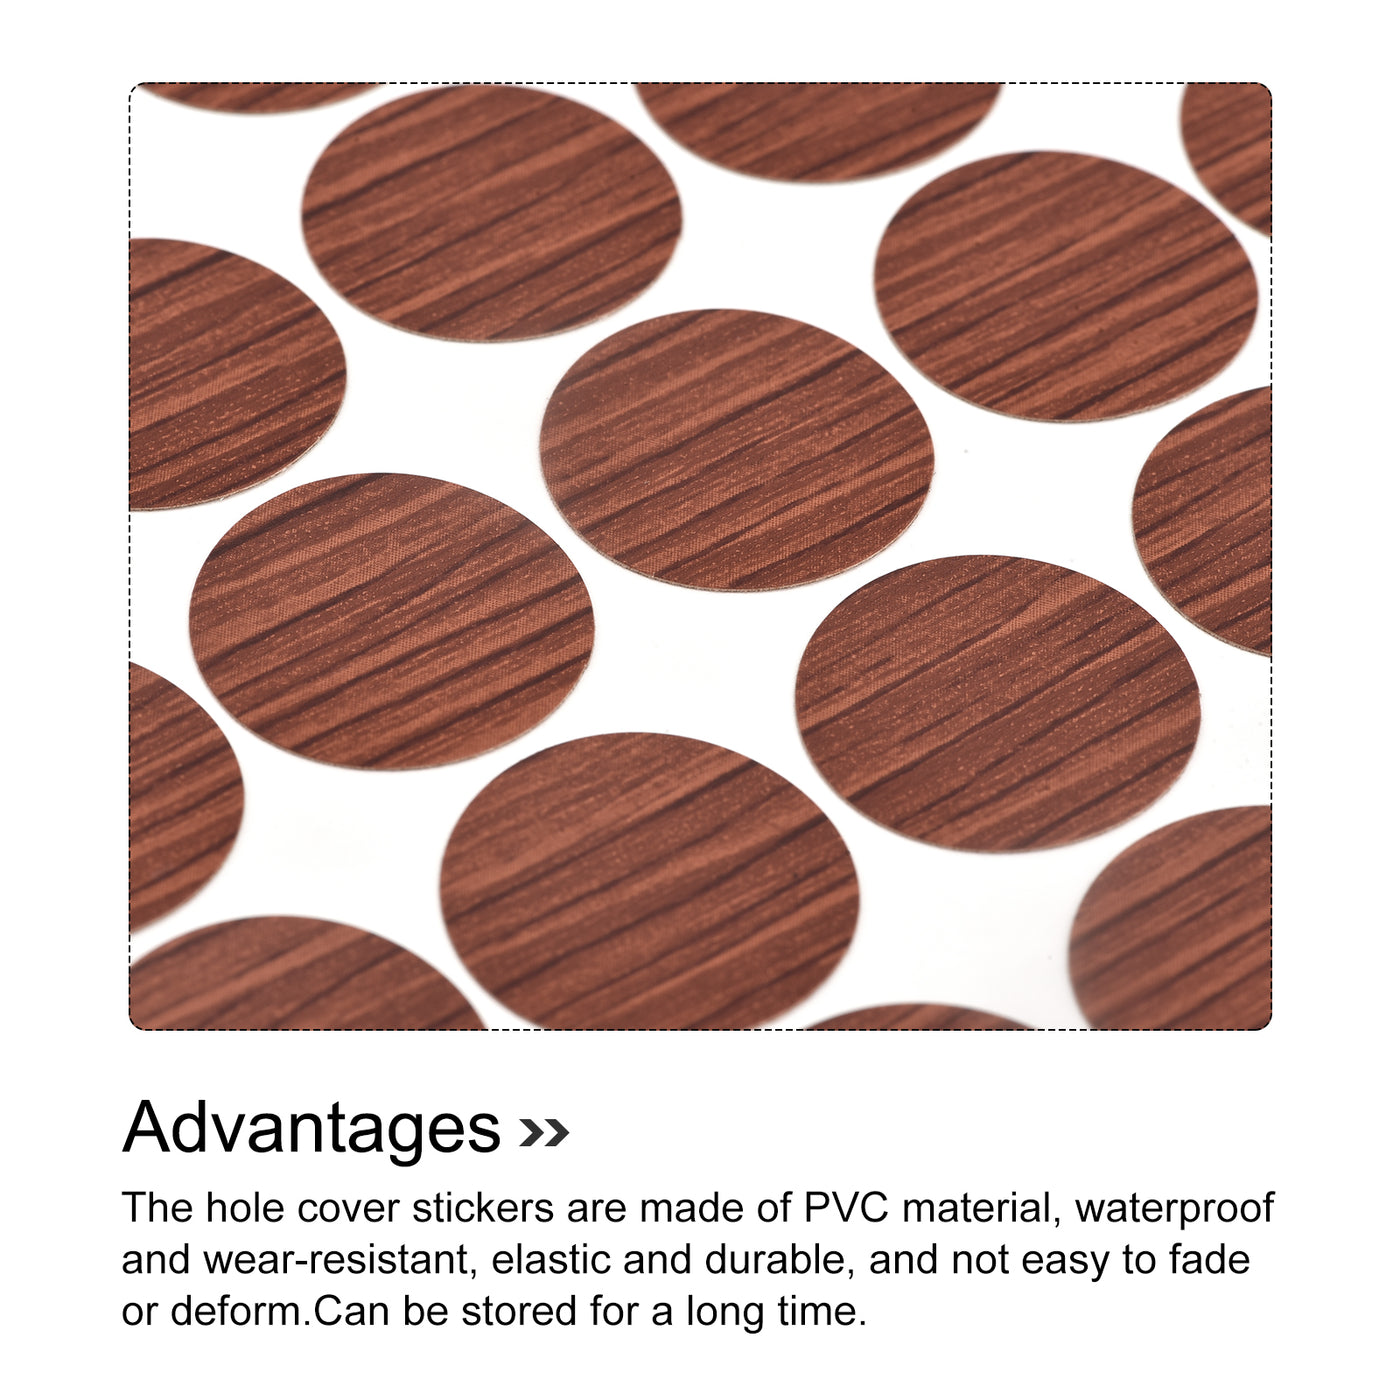 uxcell Uxcell Screw Hole Cover Stickers, 21mm Dia PVC Self Adhesive Covers Caps for Wood Furniture Cabinet Shelf Wardrobe, Walnut 4 Sheet/216pcs